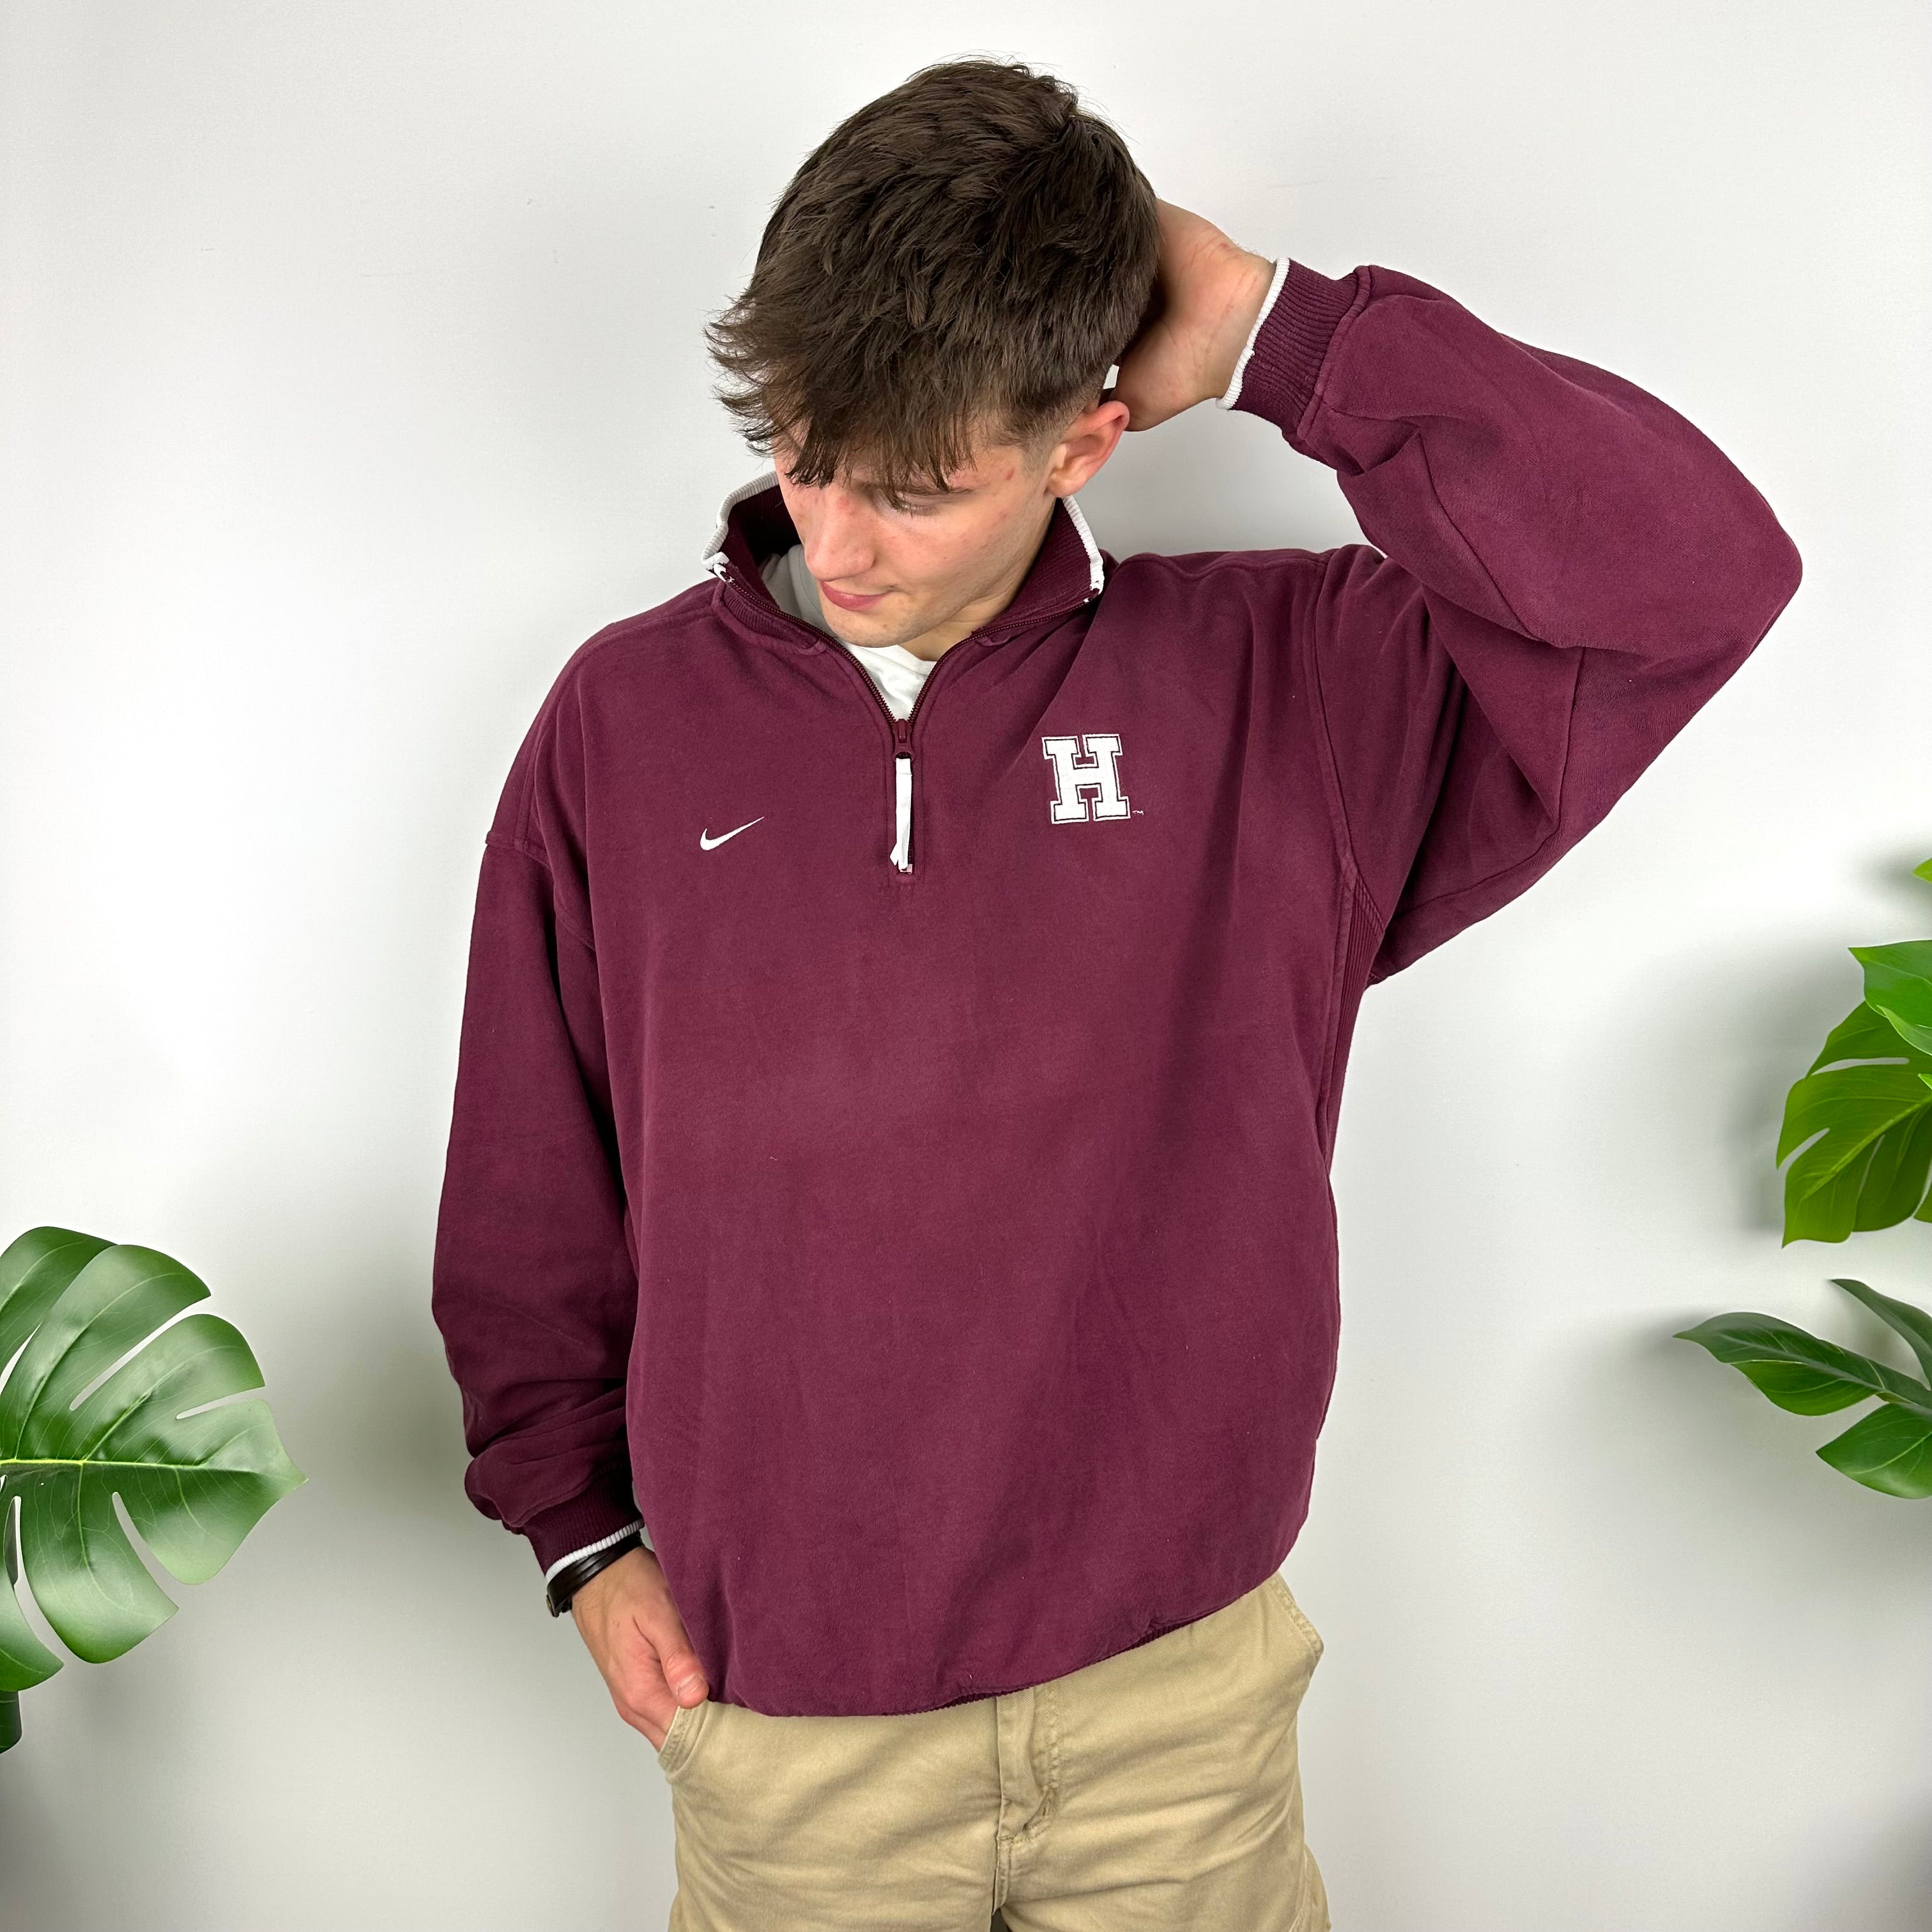 Nike Maroon Harvard Embroidered Spell Out Quarter Zip Sweatshirt (L)